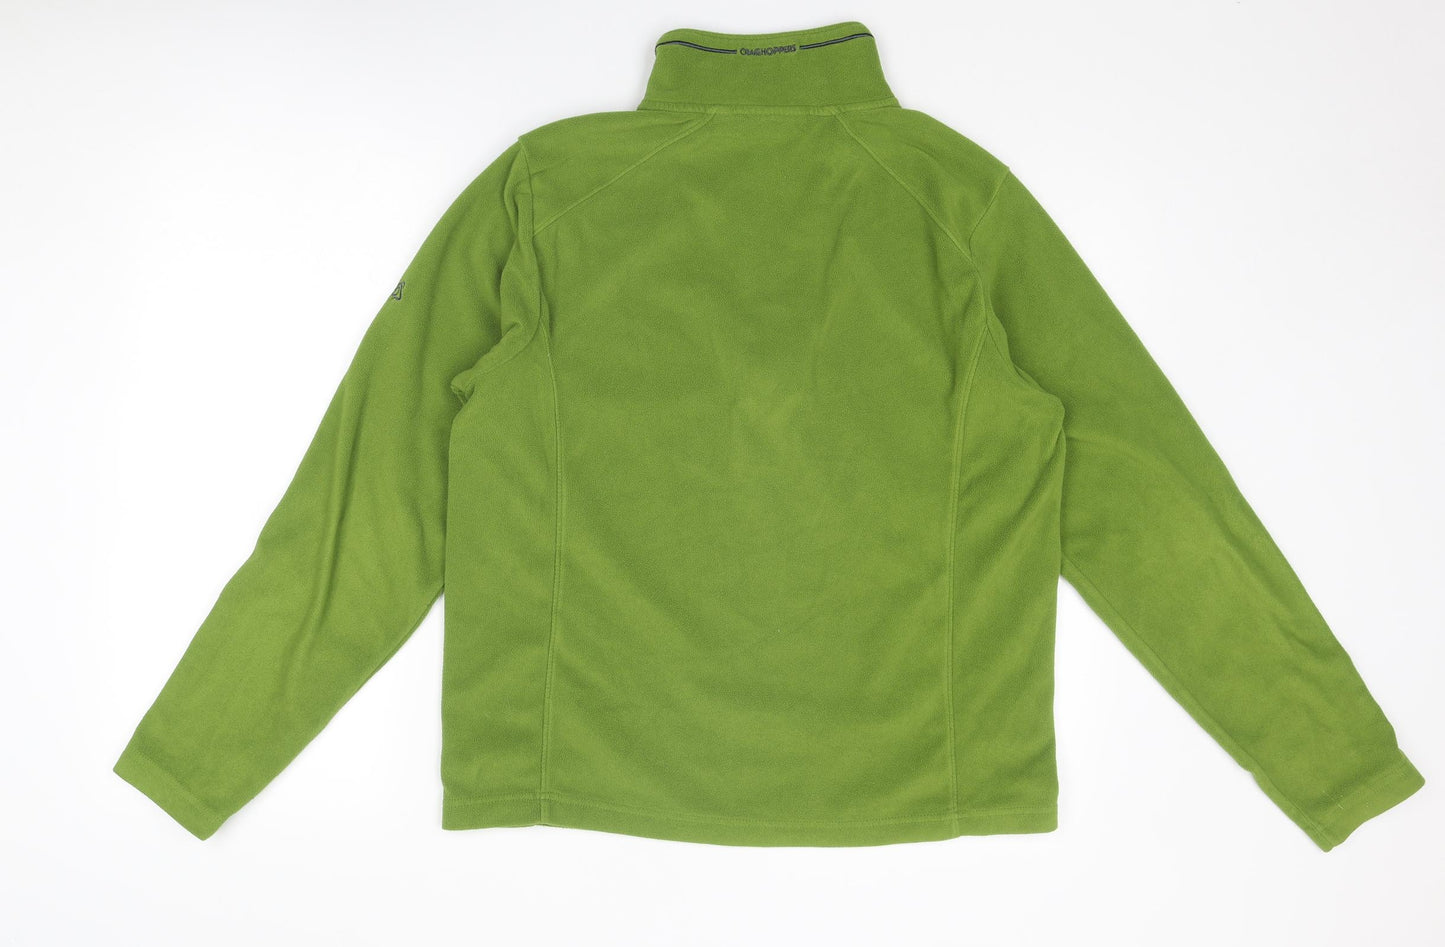 Craghoppers Mens Green Polyester Pullover Sweatshirt Size S